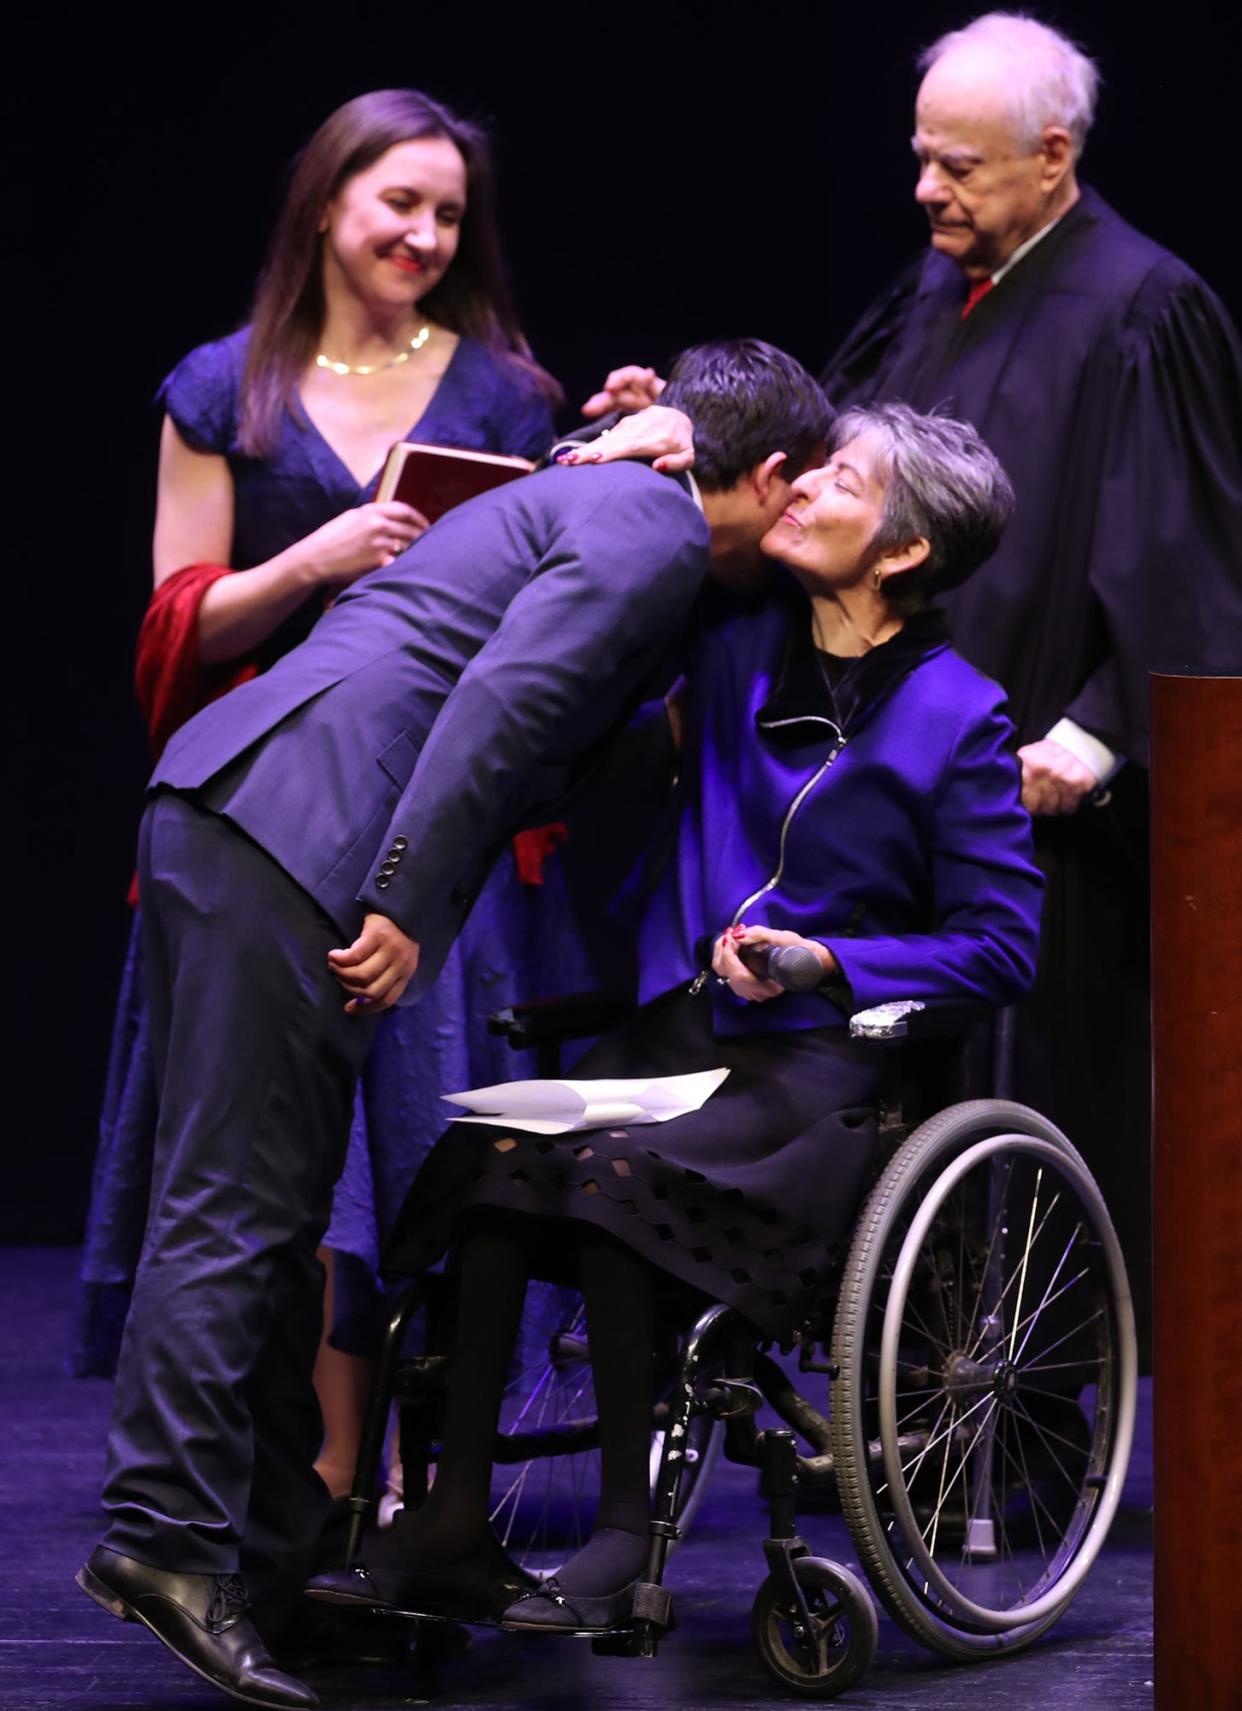 Akron Mayor Shammas Malik hugs his aunt Mary Theofanos as Alice Duey, back left, and retired Judge Ted Schneiderman look on after the ceremonial swearing-in during a public ceremony at EJ Thomas Hall on Saturday.